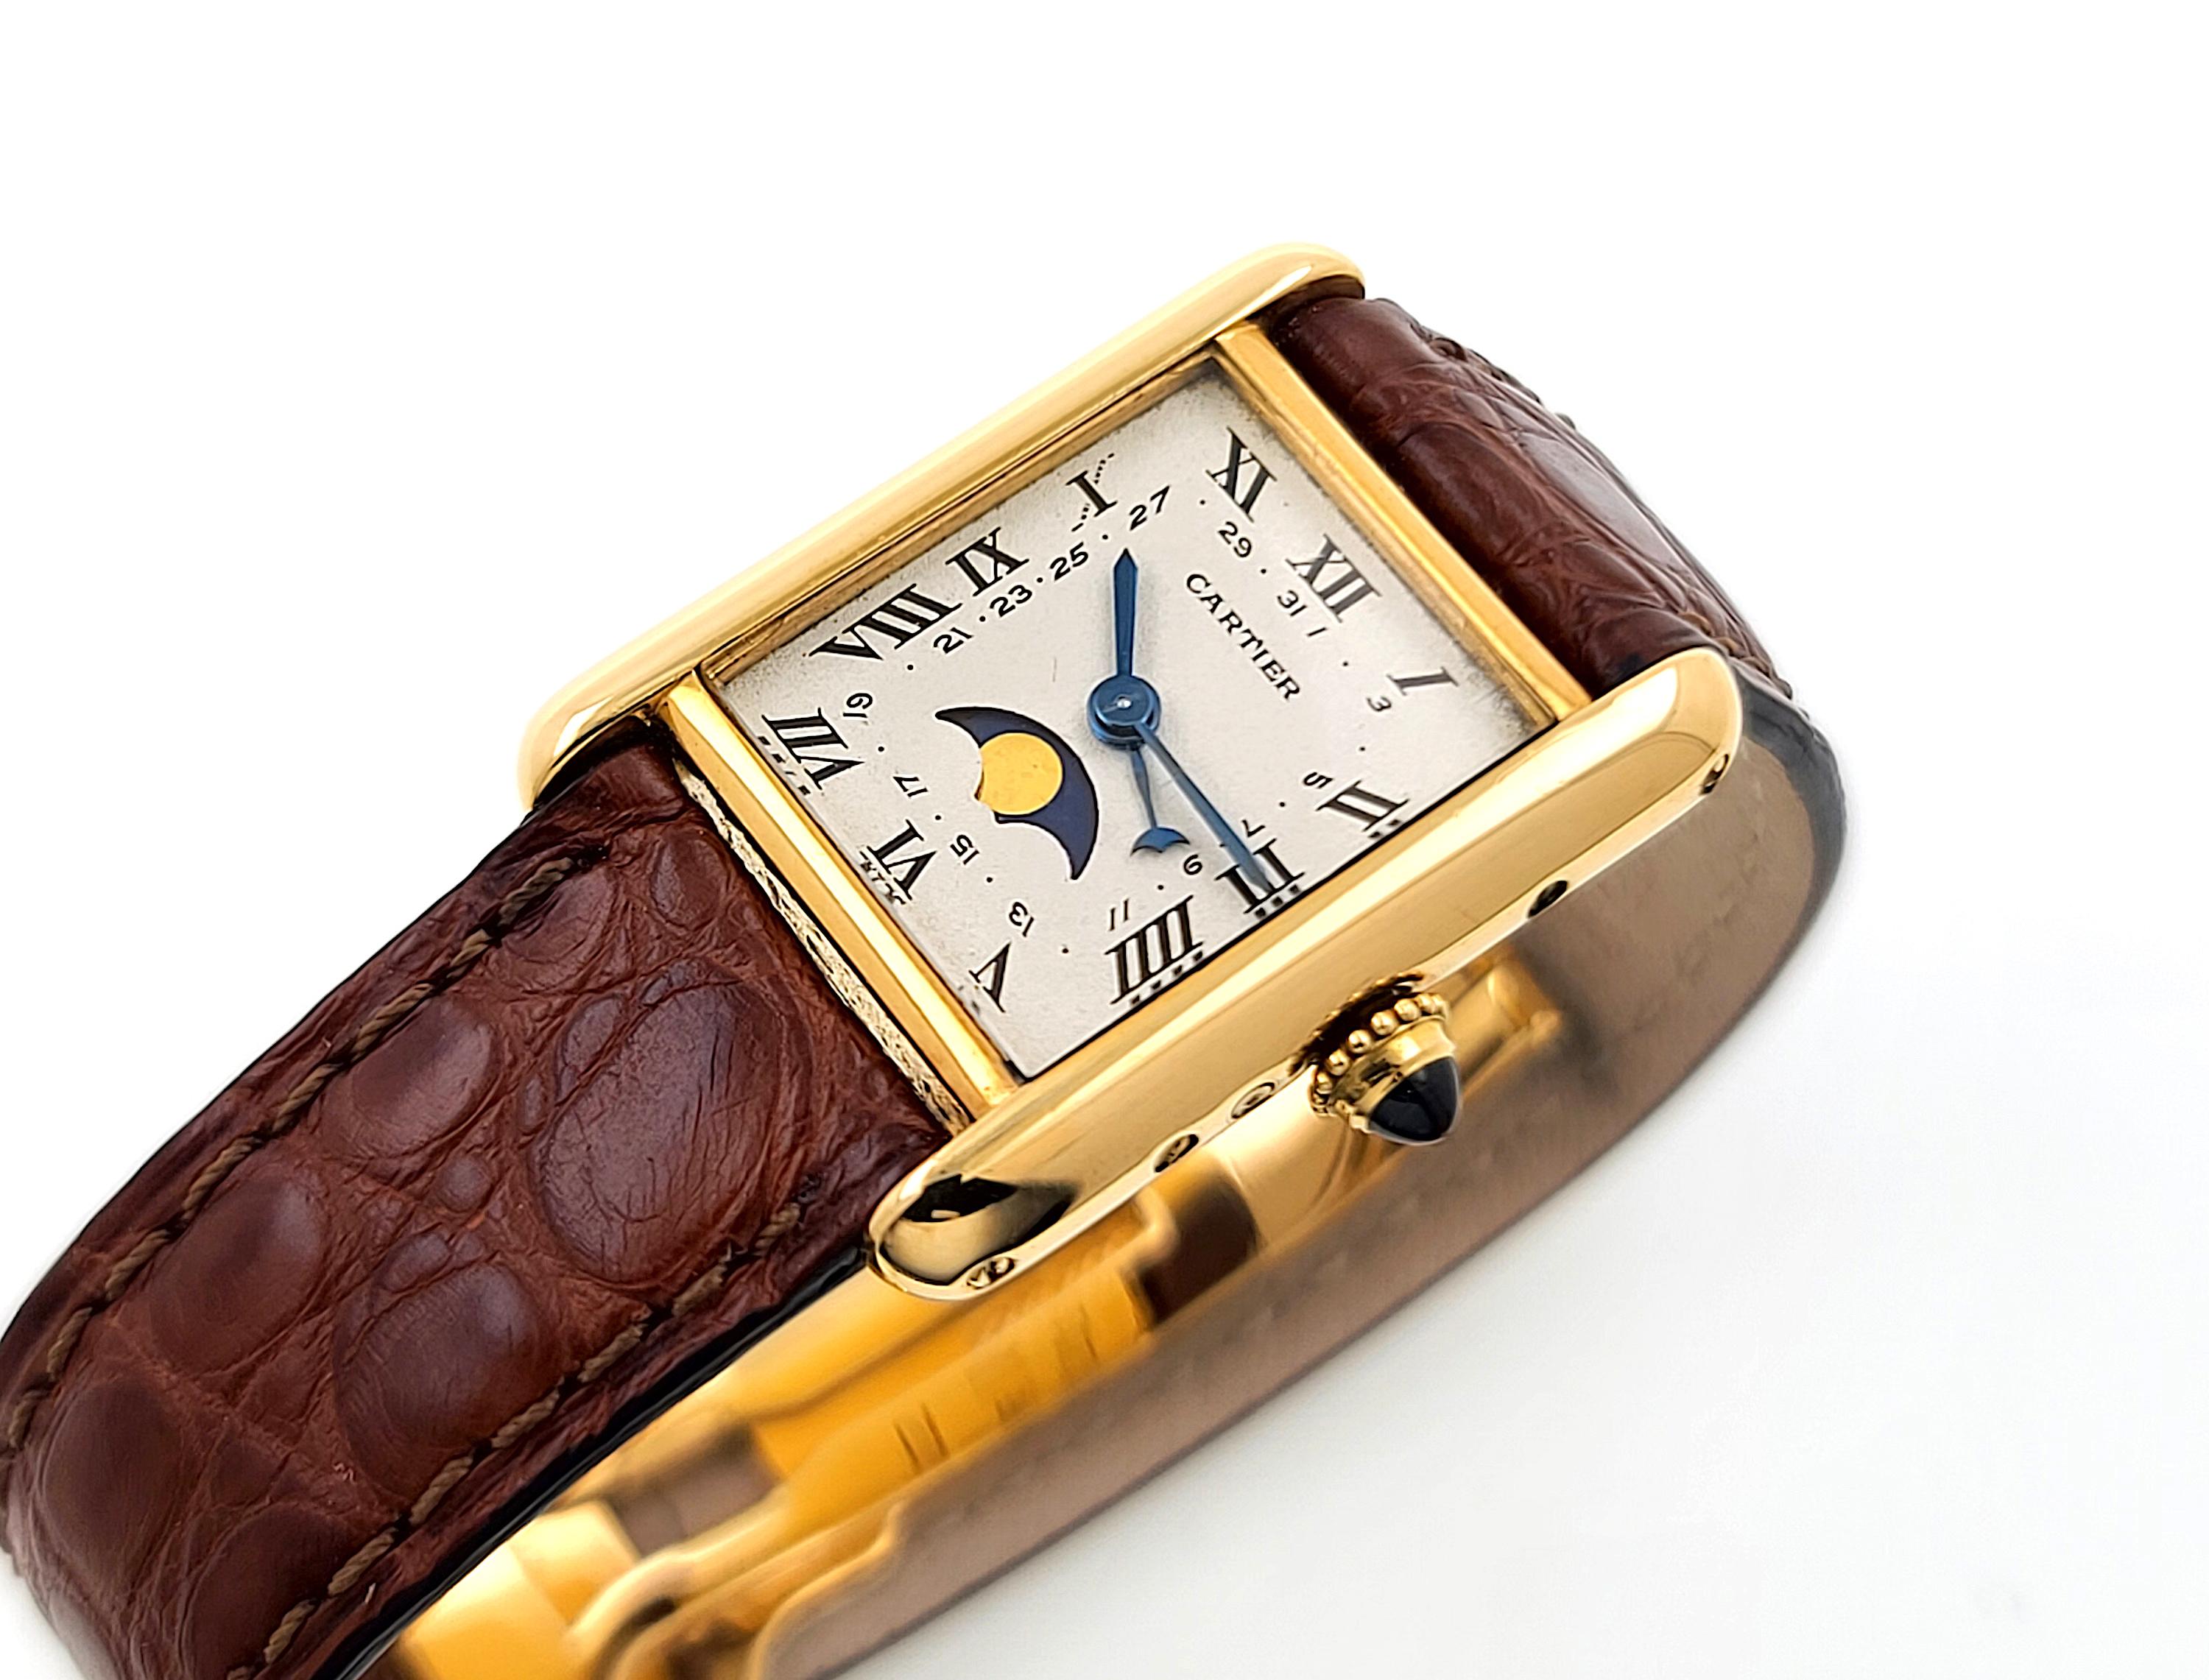 Cabochon Cartier Tank Louis Moon phase Date 819003 LC Medium MM 18k Gold + Folding Clasp